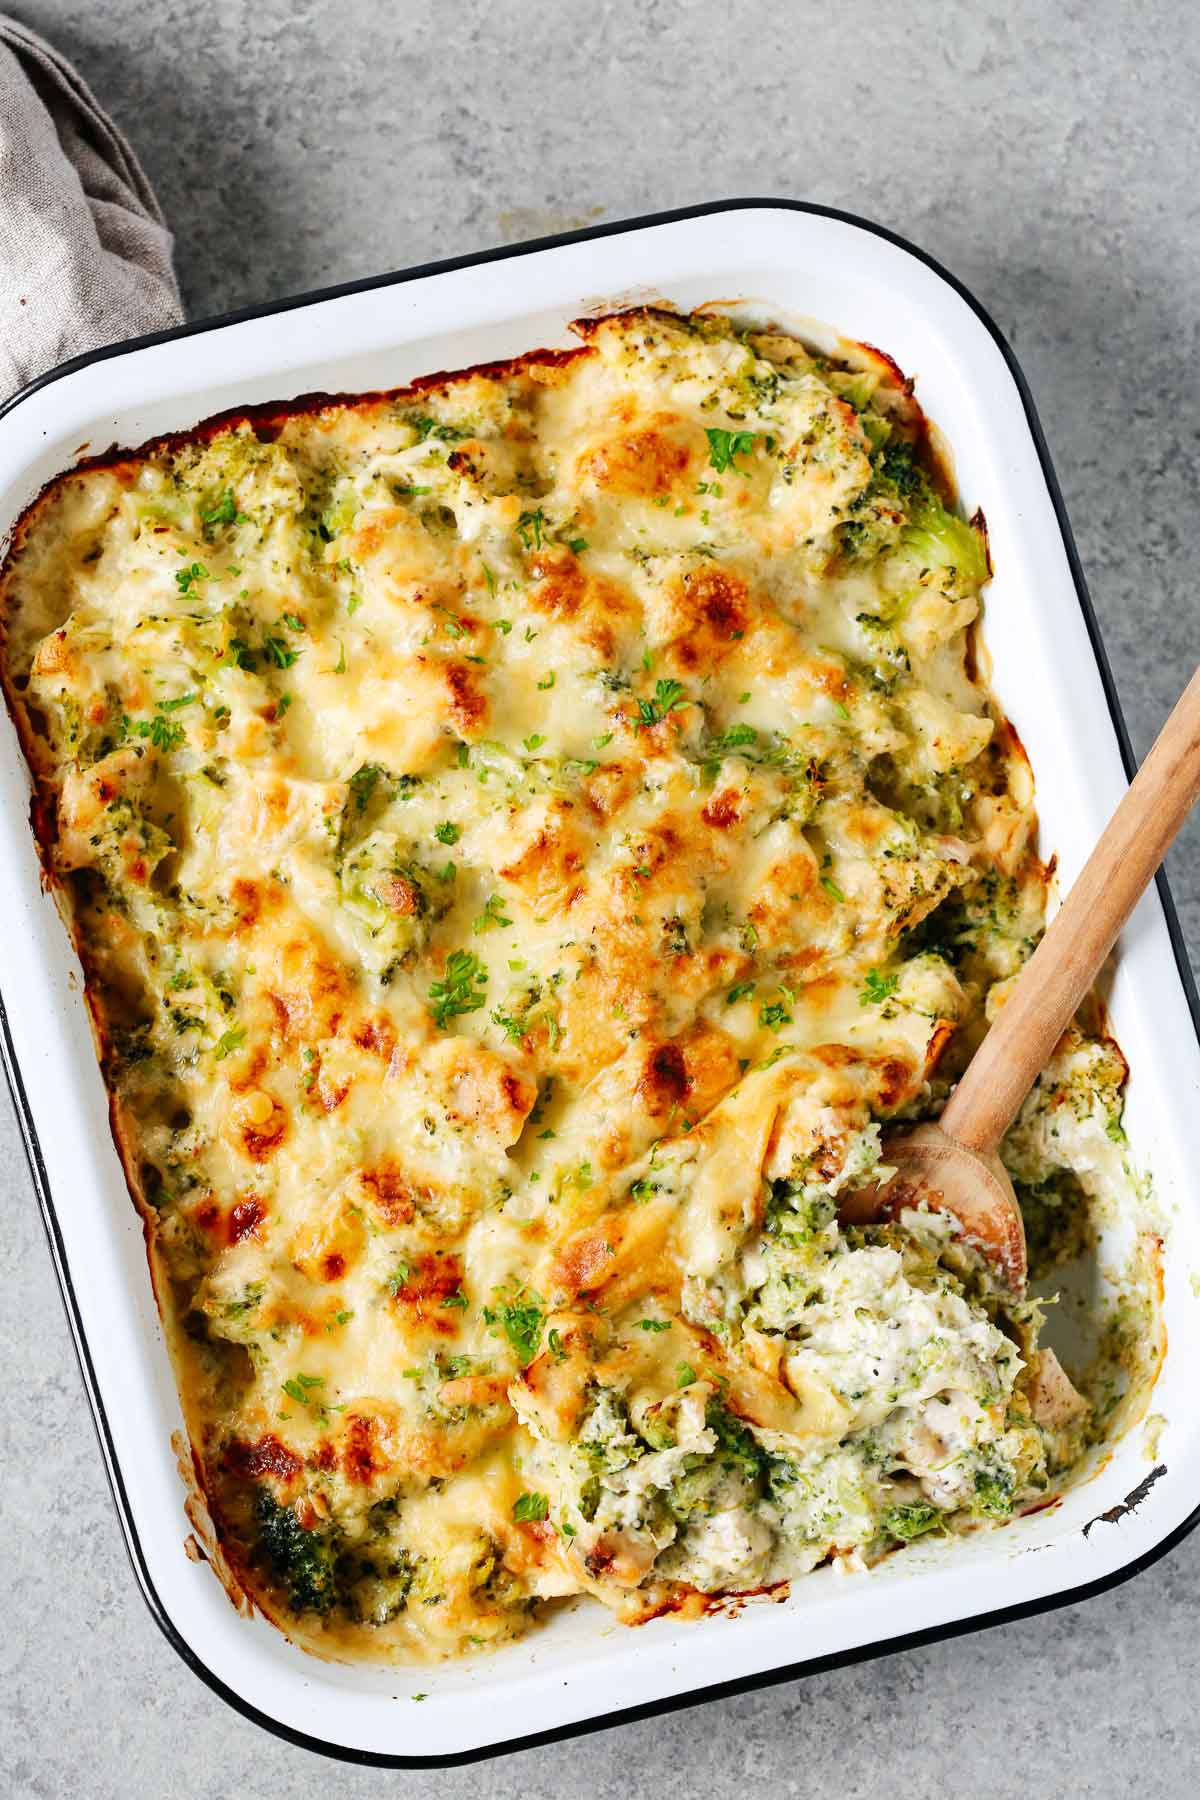  baked dish with broccoli and cauliflower with melted cheese on top 